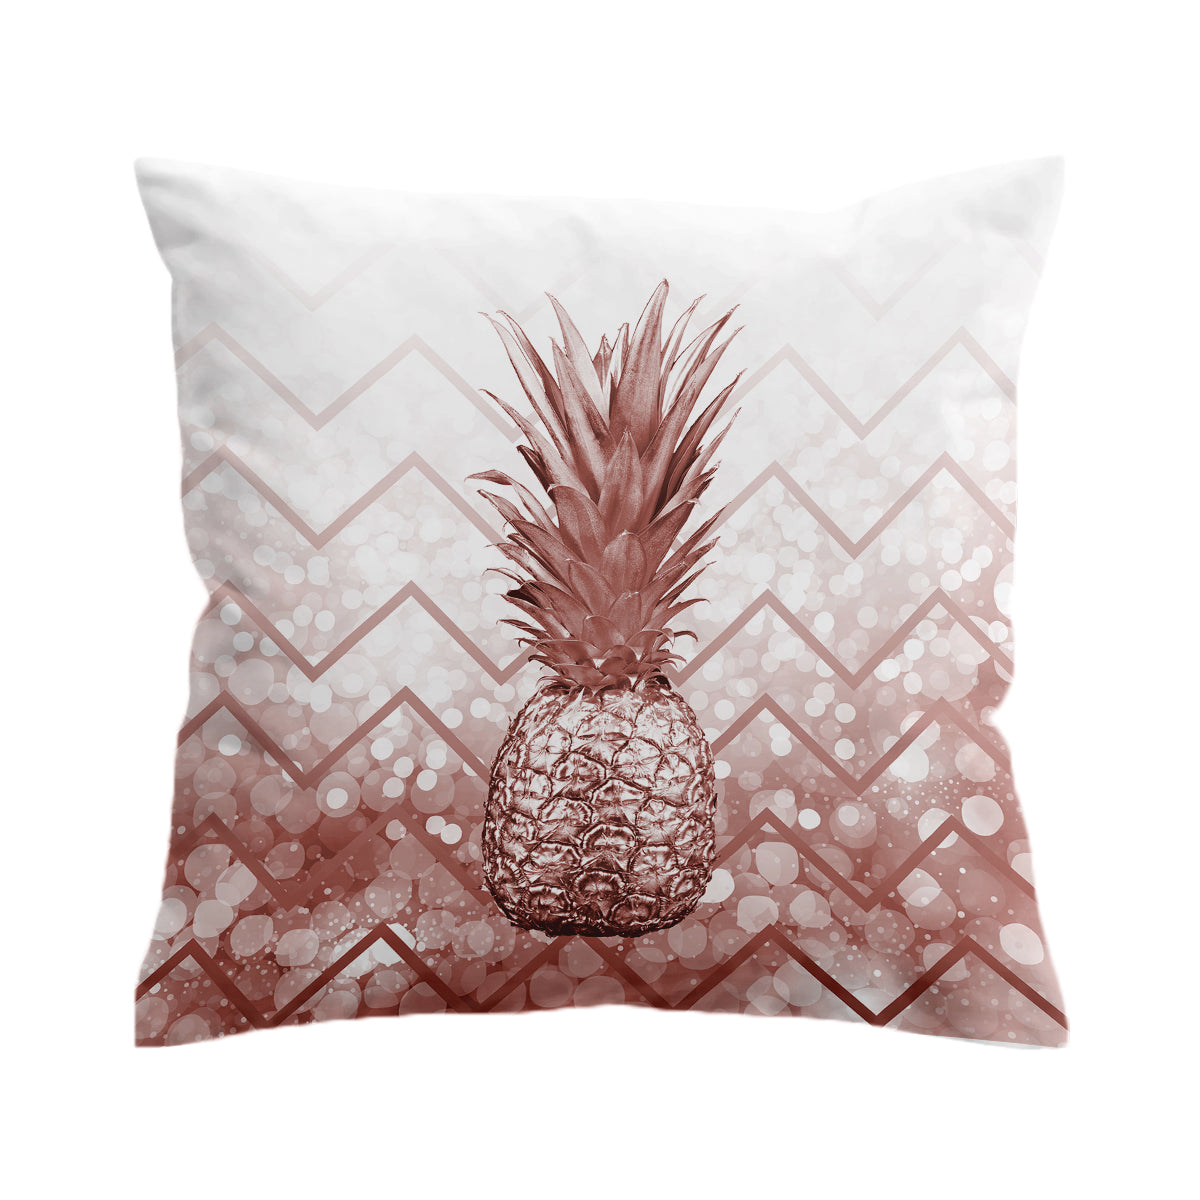 The Golden Pineapple Pillow Cover